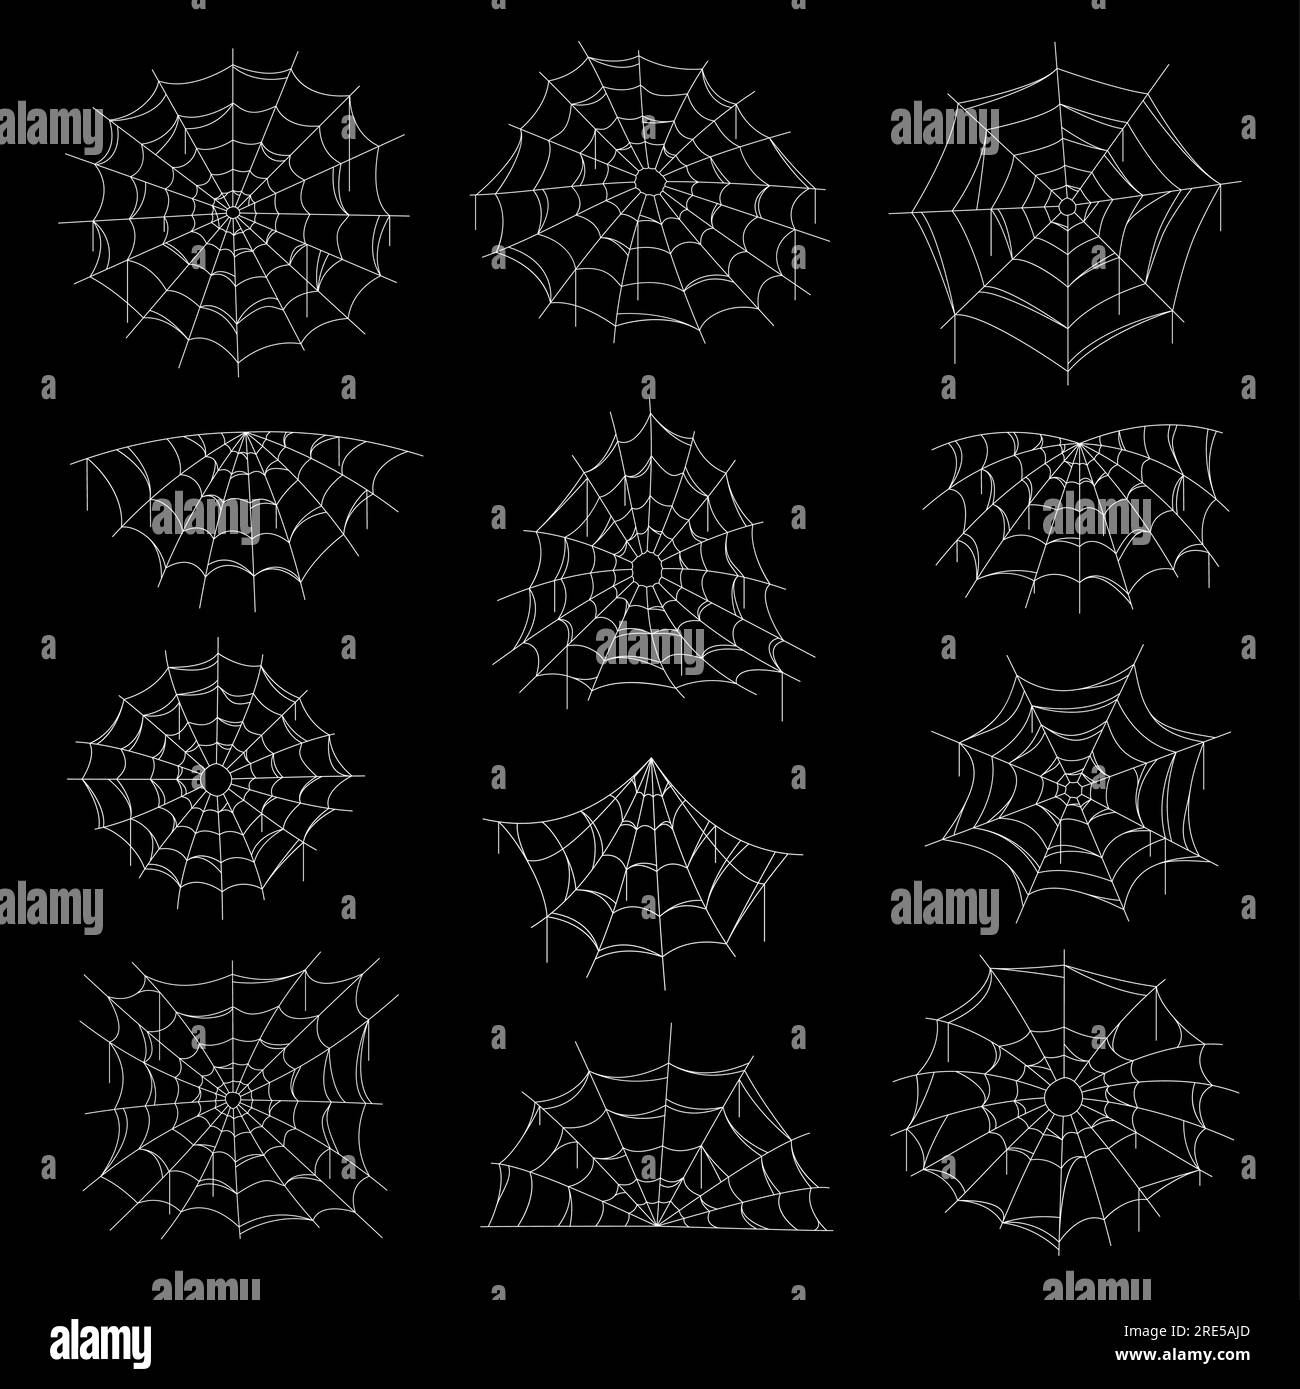 Spider web and net vector icons on black background, Halloween horror holiday. Cobwebs and spiderwebs with white silk circular nets and spiral orb webs, trick or treat party decoration design Stock Vector